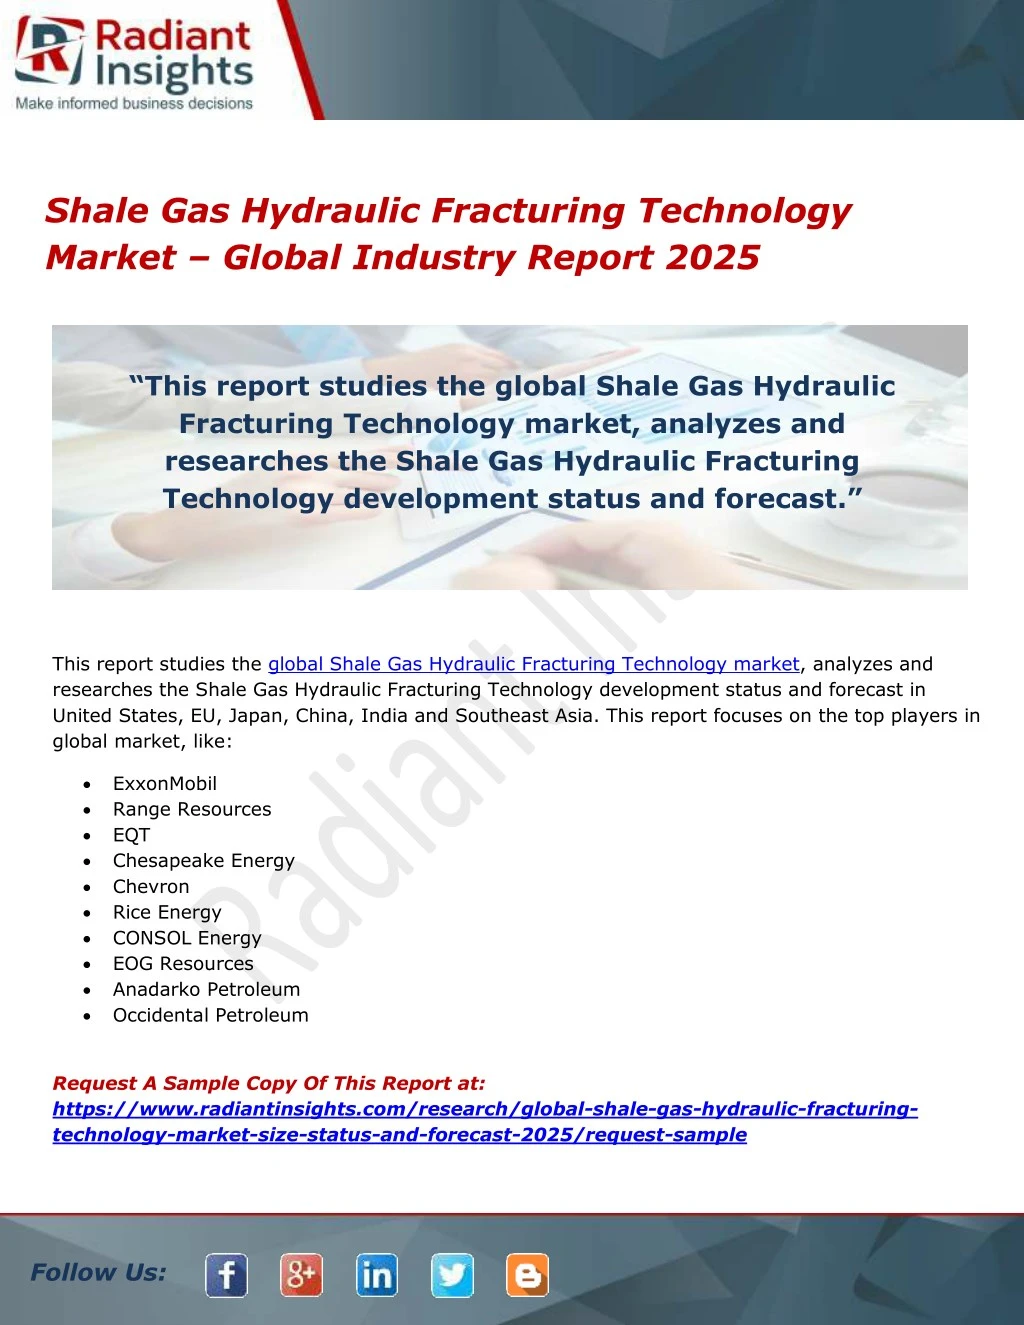 shale gas hydraulic fracturing technology market